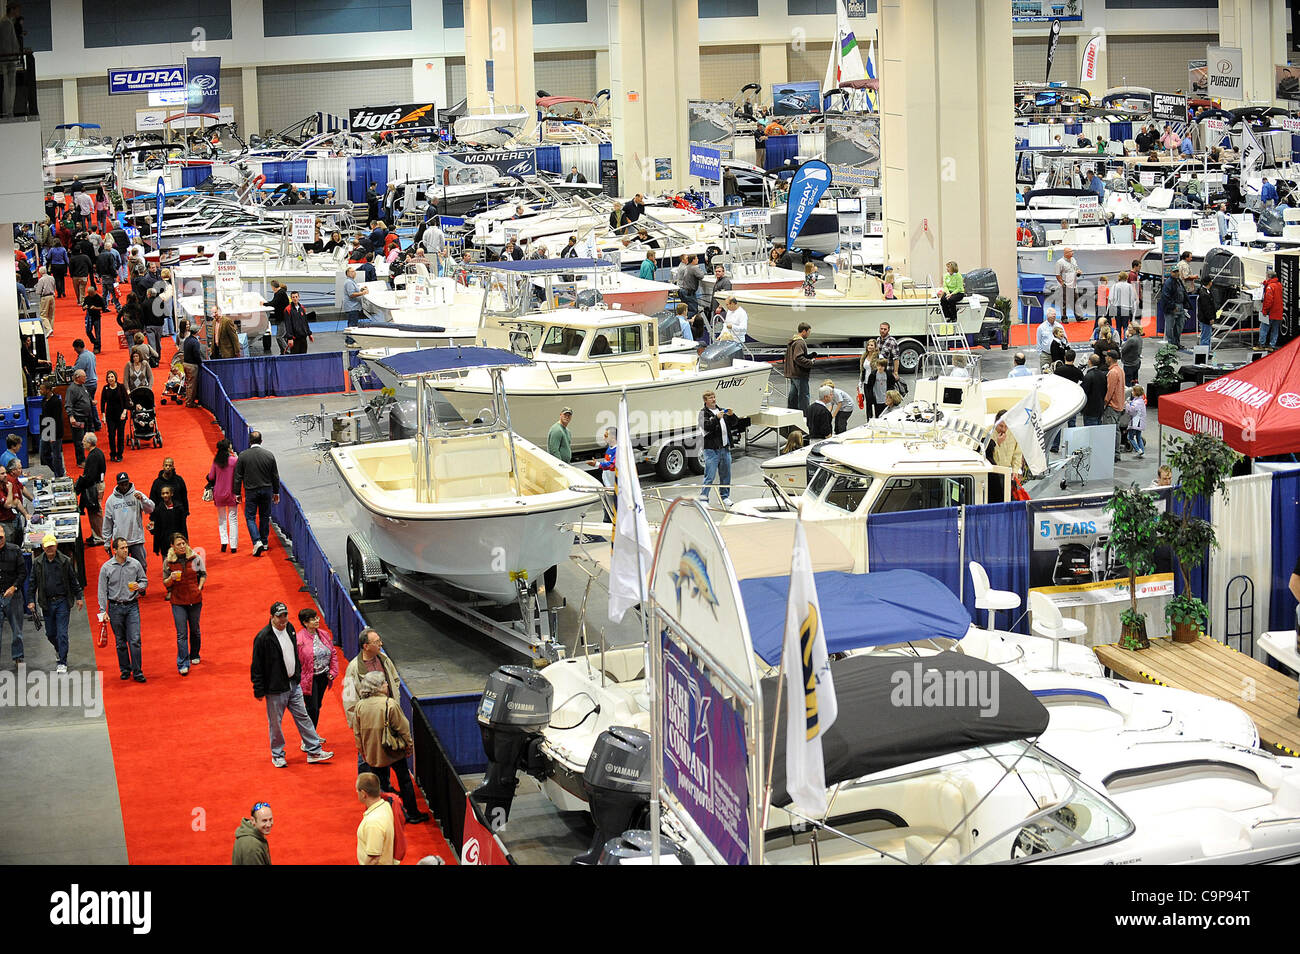 Feb. 4, 2012 - Raleigh, North Carolina; USA - Patrons attend the 2012 Raleigh Convention Center Boat Show that took place at the Raleigh Convention Center. Thousands of people attend the event to see new boats and watercraft  models. Copyright 2012 Jason Moore. (Credit Image: © Jason Moore/ZUMAPRESS Stock Photo